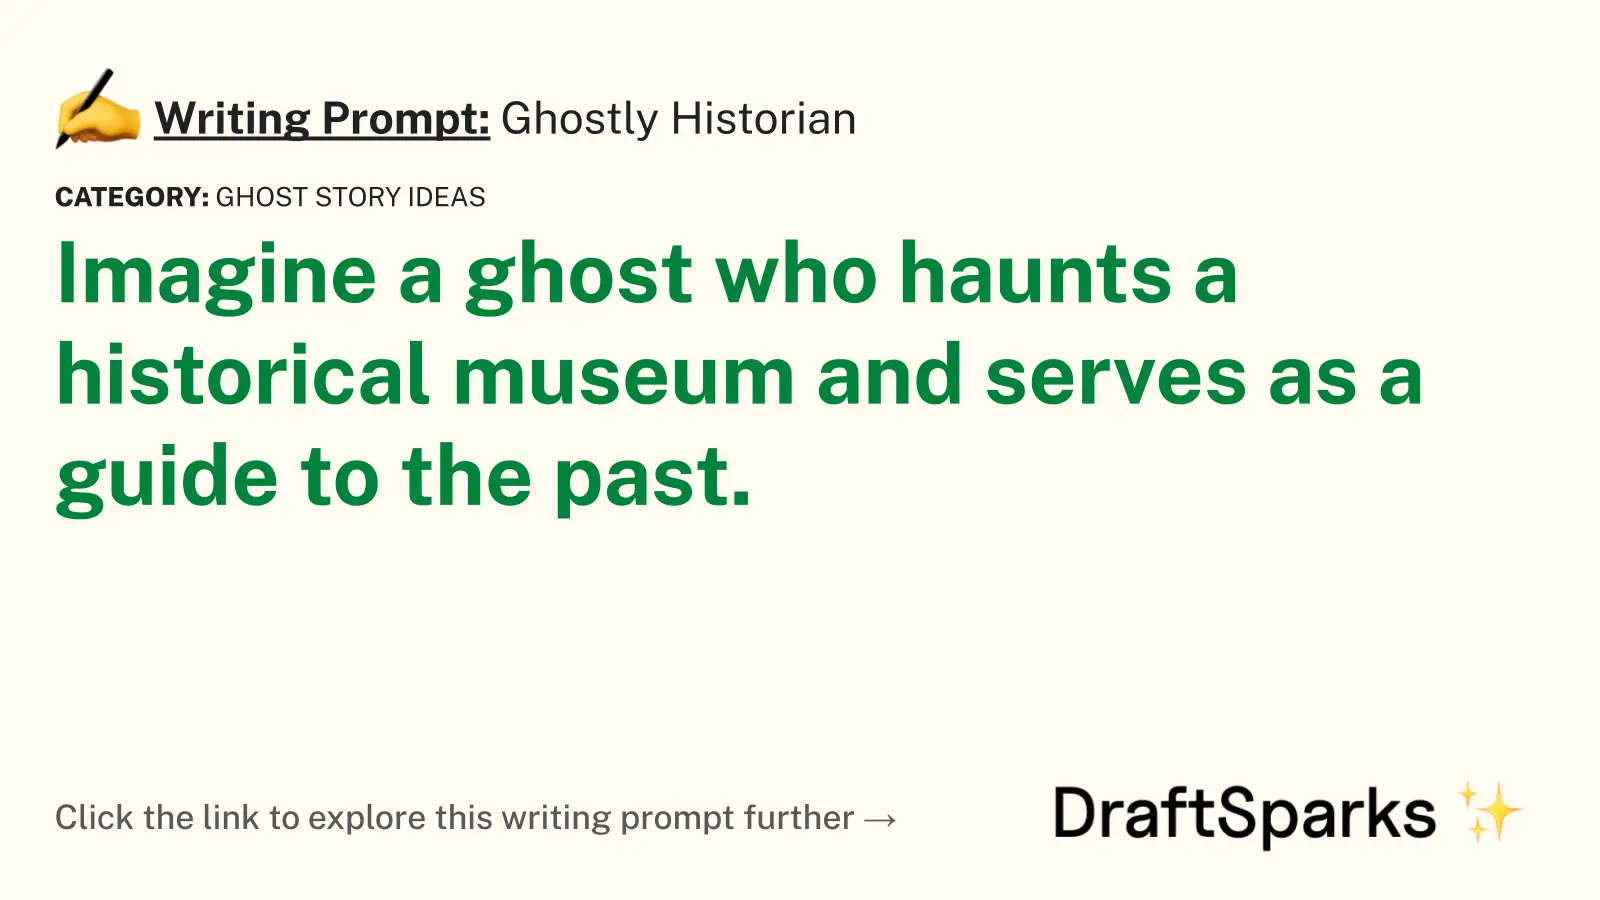 Ghostly Historian